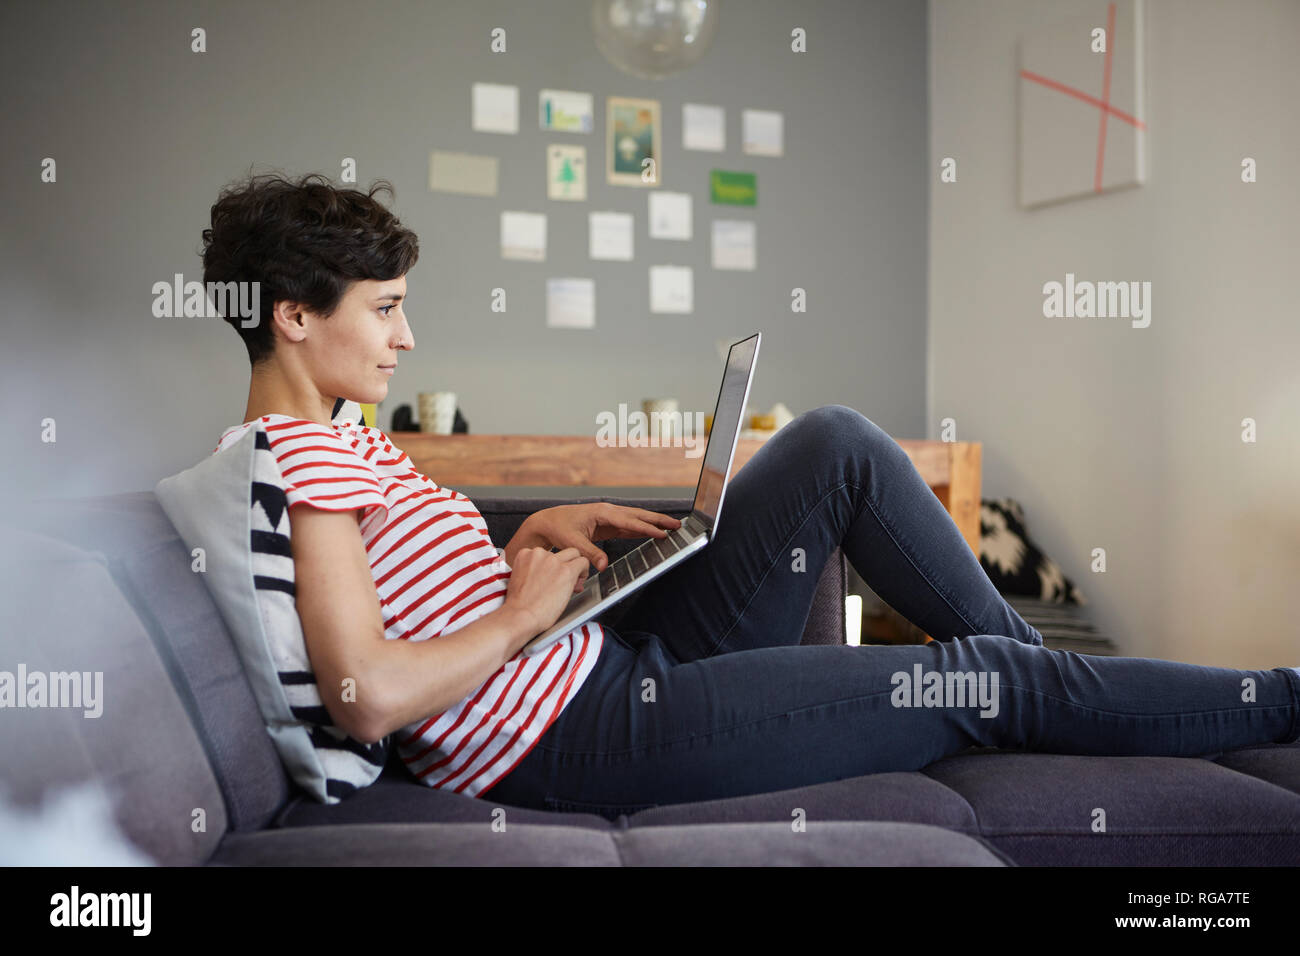 Woman using laptop on couch at home Stock Photo